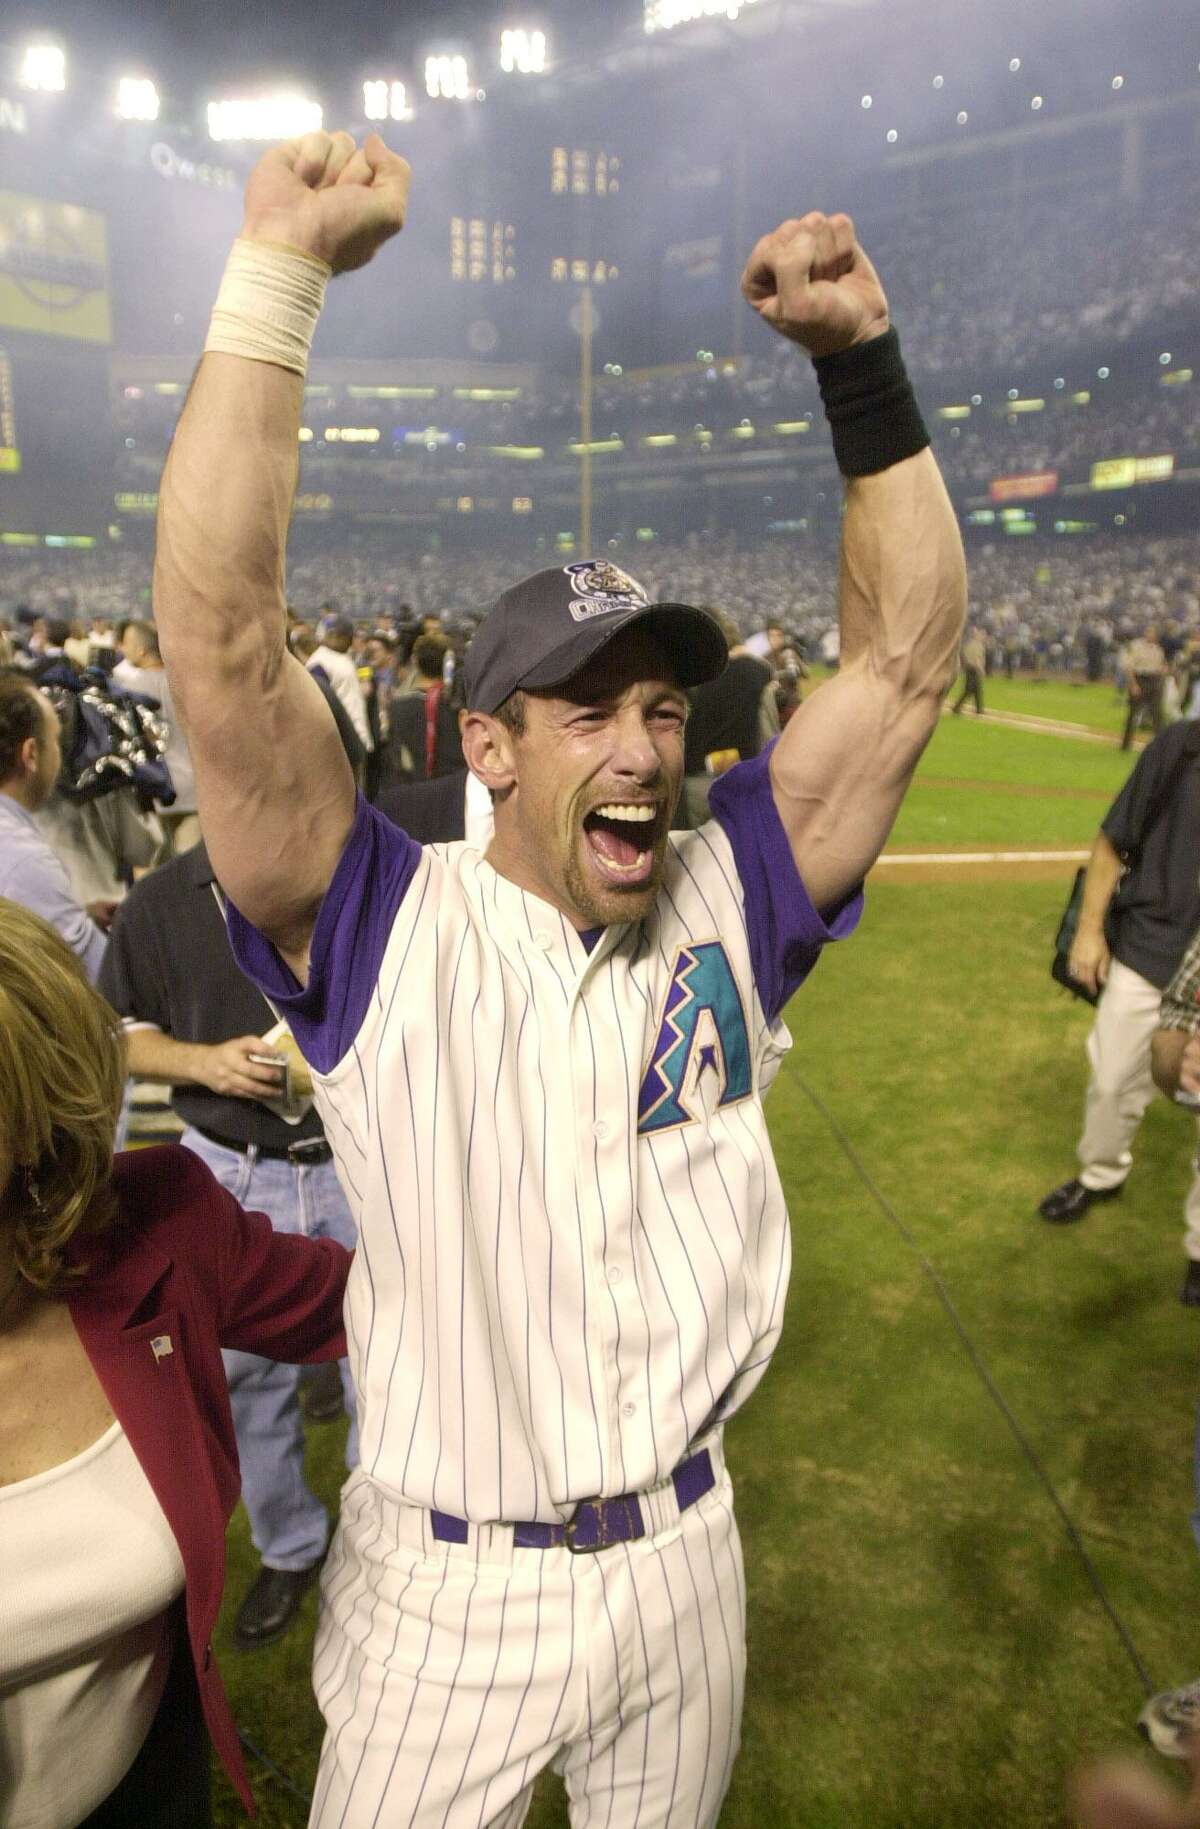 FOR USE WITH YEAR END STORIES Arizona Diamondbacks' Luis Gonzalez celebrates the Diamondbacks' 3-2 victory over the New York Yankees in Game 7 of the World Series Sunday, Nov. 4, 2001, at Bank One Ballpark in Phoenix. Gonzalez drove in Jay Bell for the winning run in the ninth inning. (AP Photo/David J. Phillip). HOUCHRON CAPTION (12/30/2001): Going Gonzo: Former Astro Luis Gonzalez celebrates on the field after his bloop single lifted the Diamondbacks to the World Series title. The Year in Sports: TOP 10 NATIONAL STORIES OF 2001.